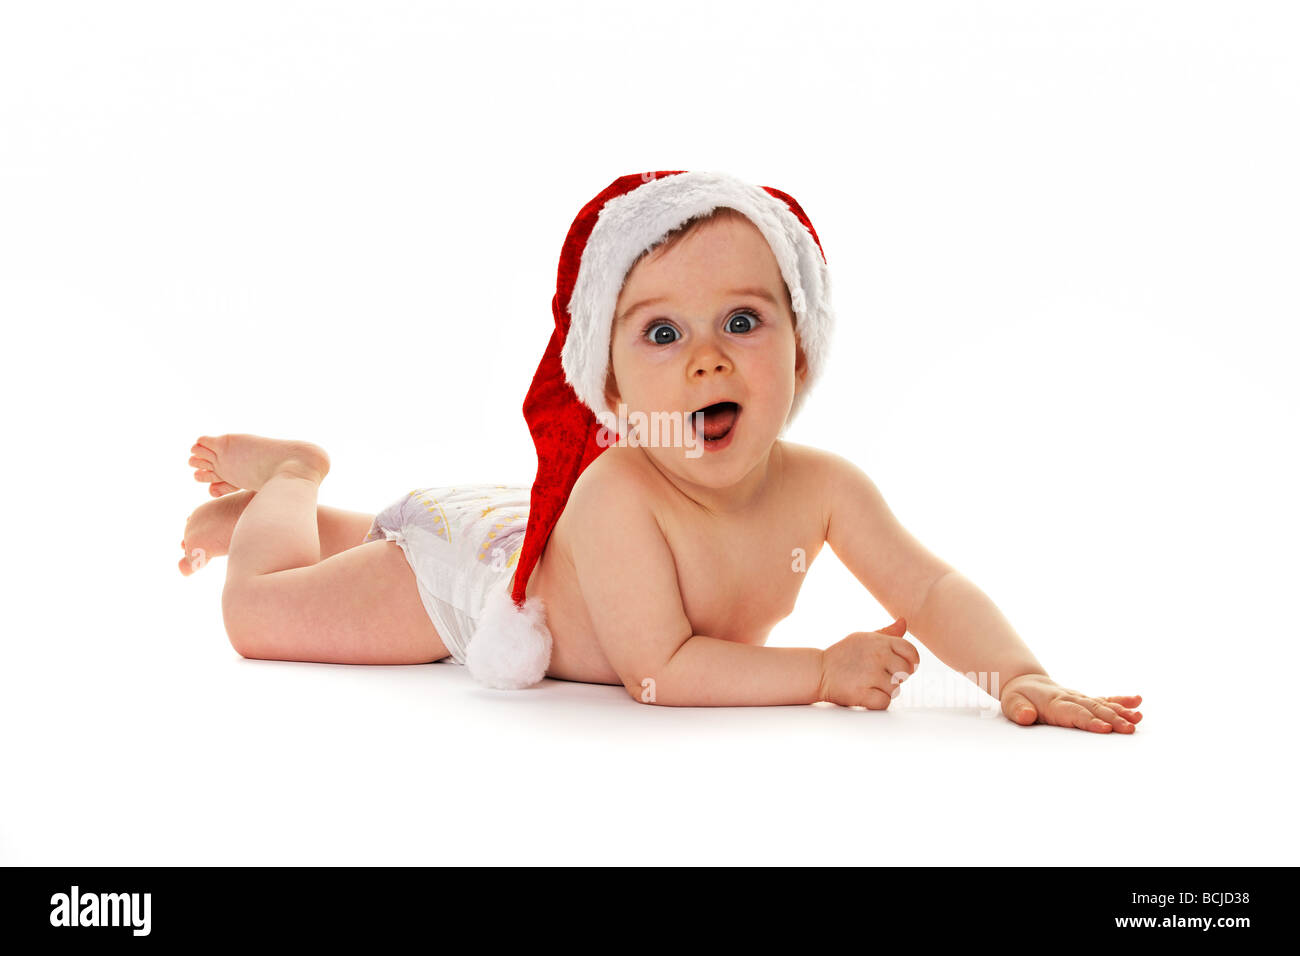 Small child with Santa Claus hat baby isolated on white background Stock Photo